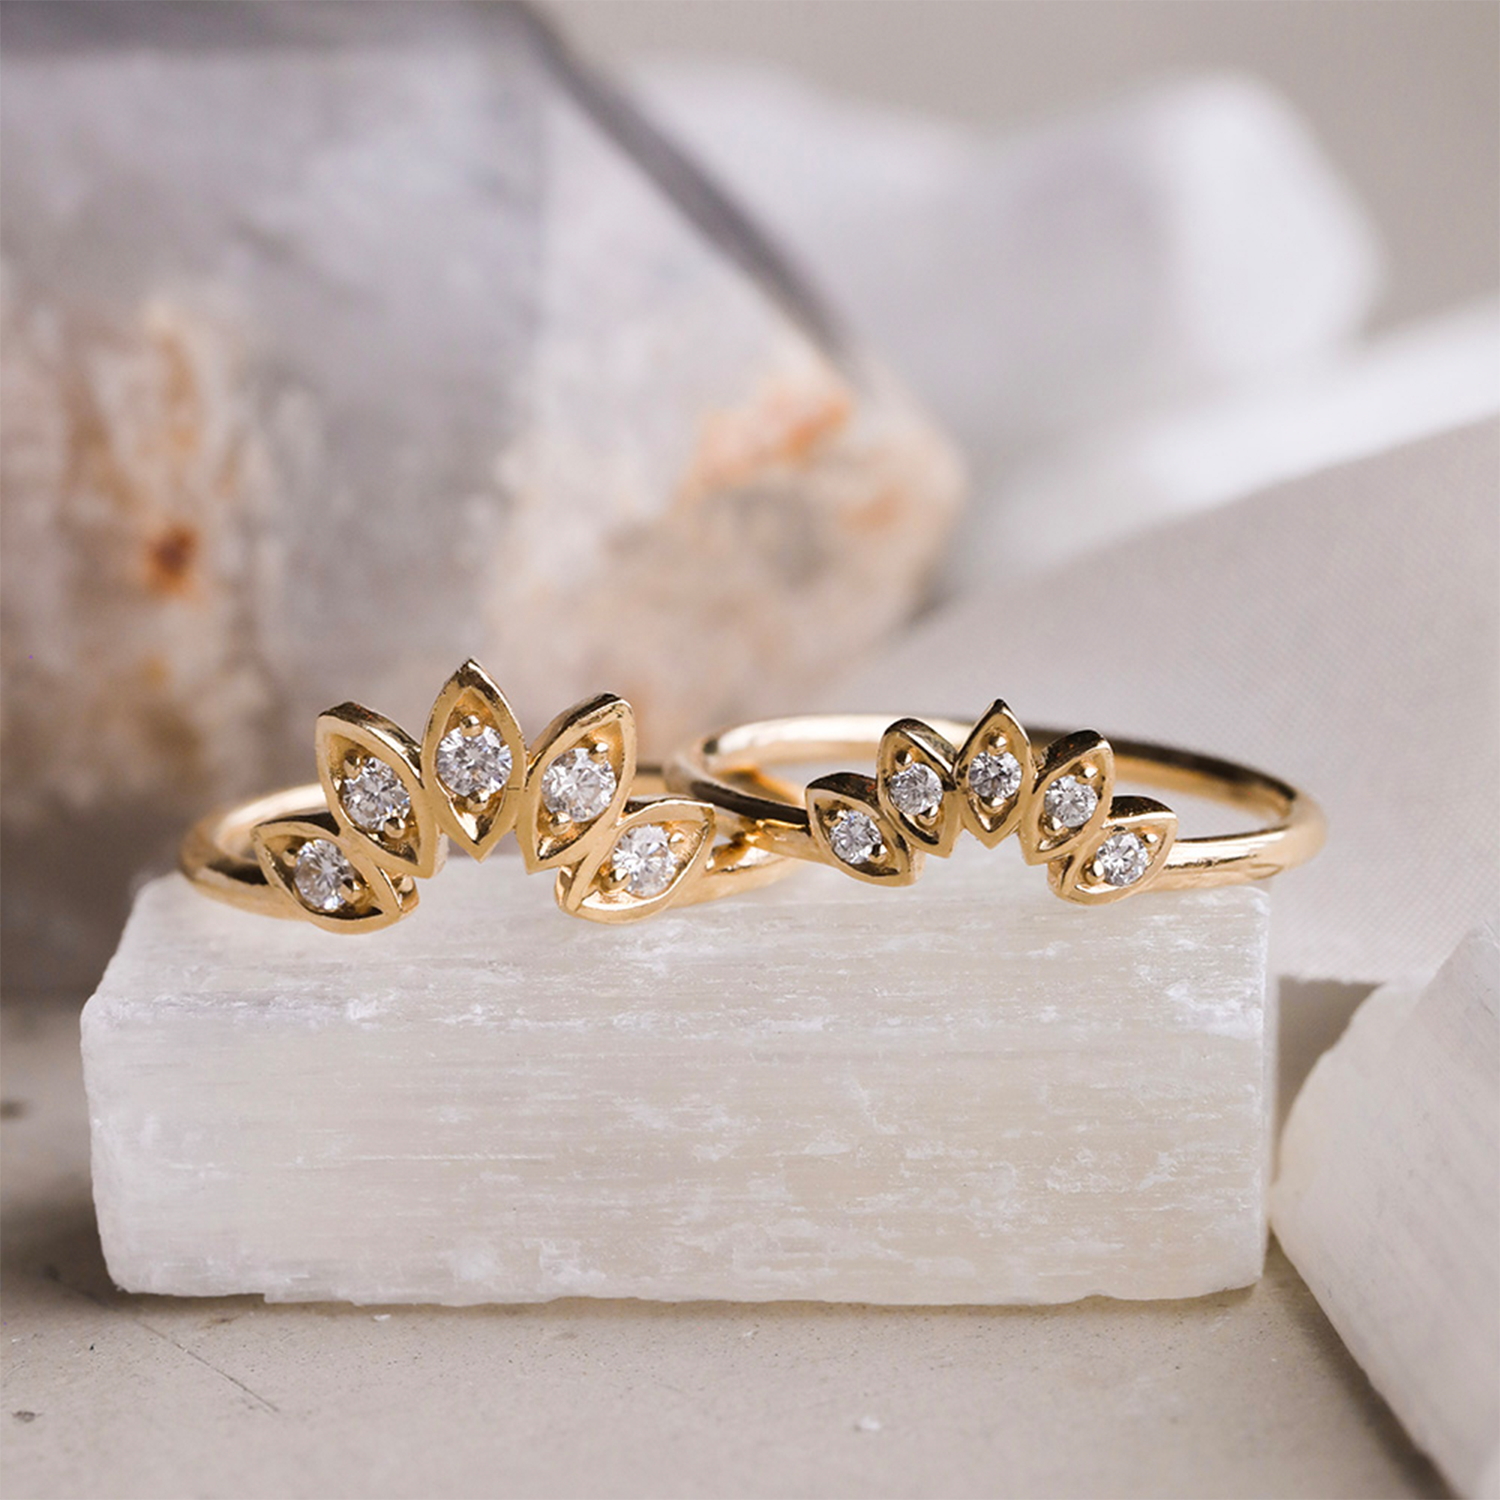 New Diamond Rings Design 💎 In Gold With Gorgeous Stones || Rings Designs.  | Diamond rings design, Stone ring design, Gold ring designs